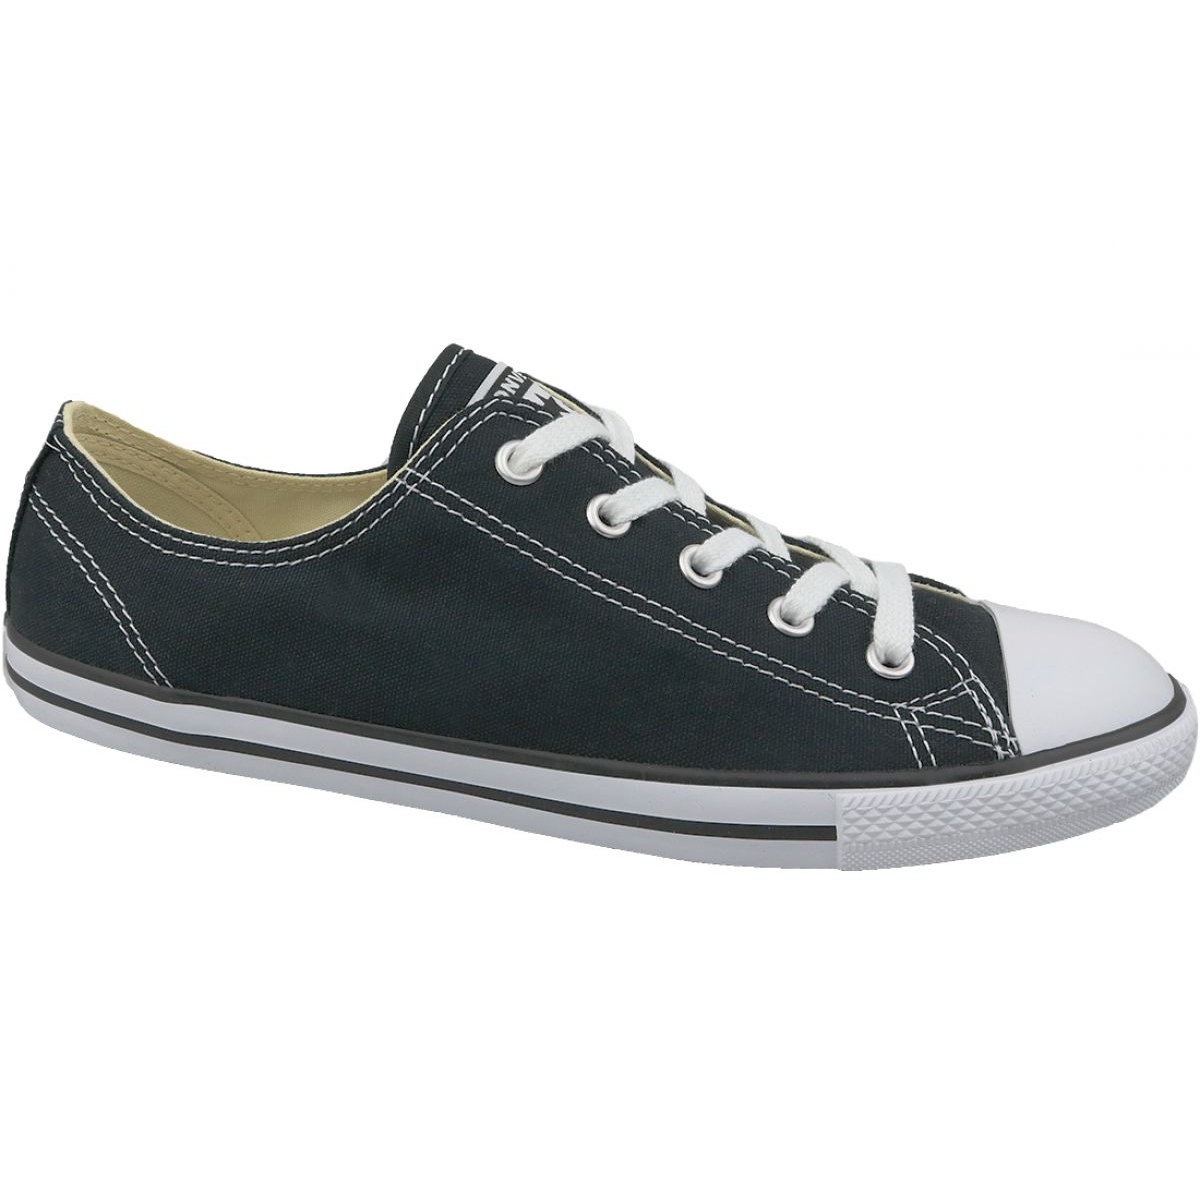 Converse Ct All Star Dainty W 530054C black KeeShoes